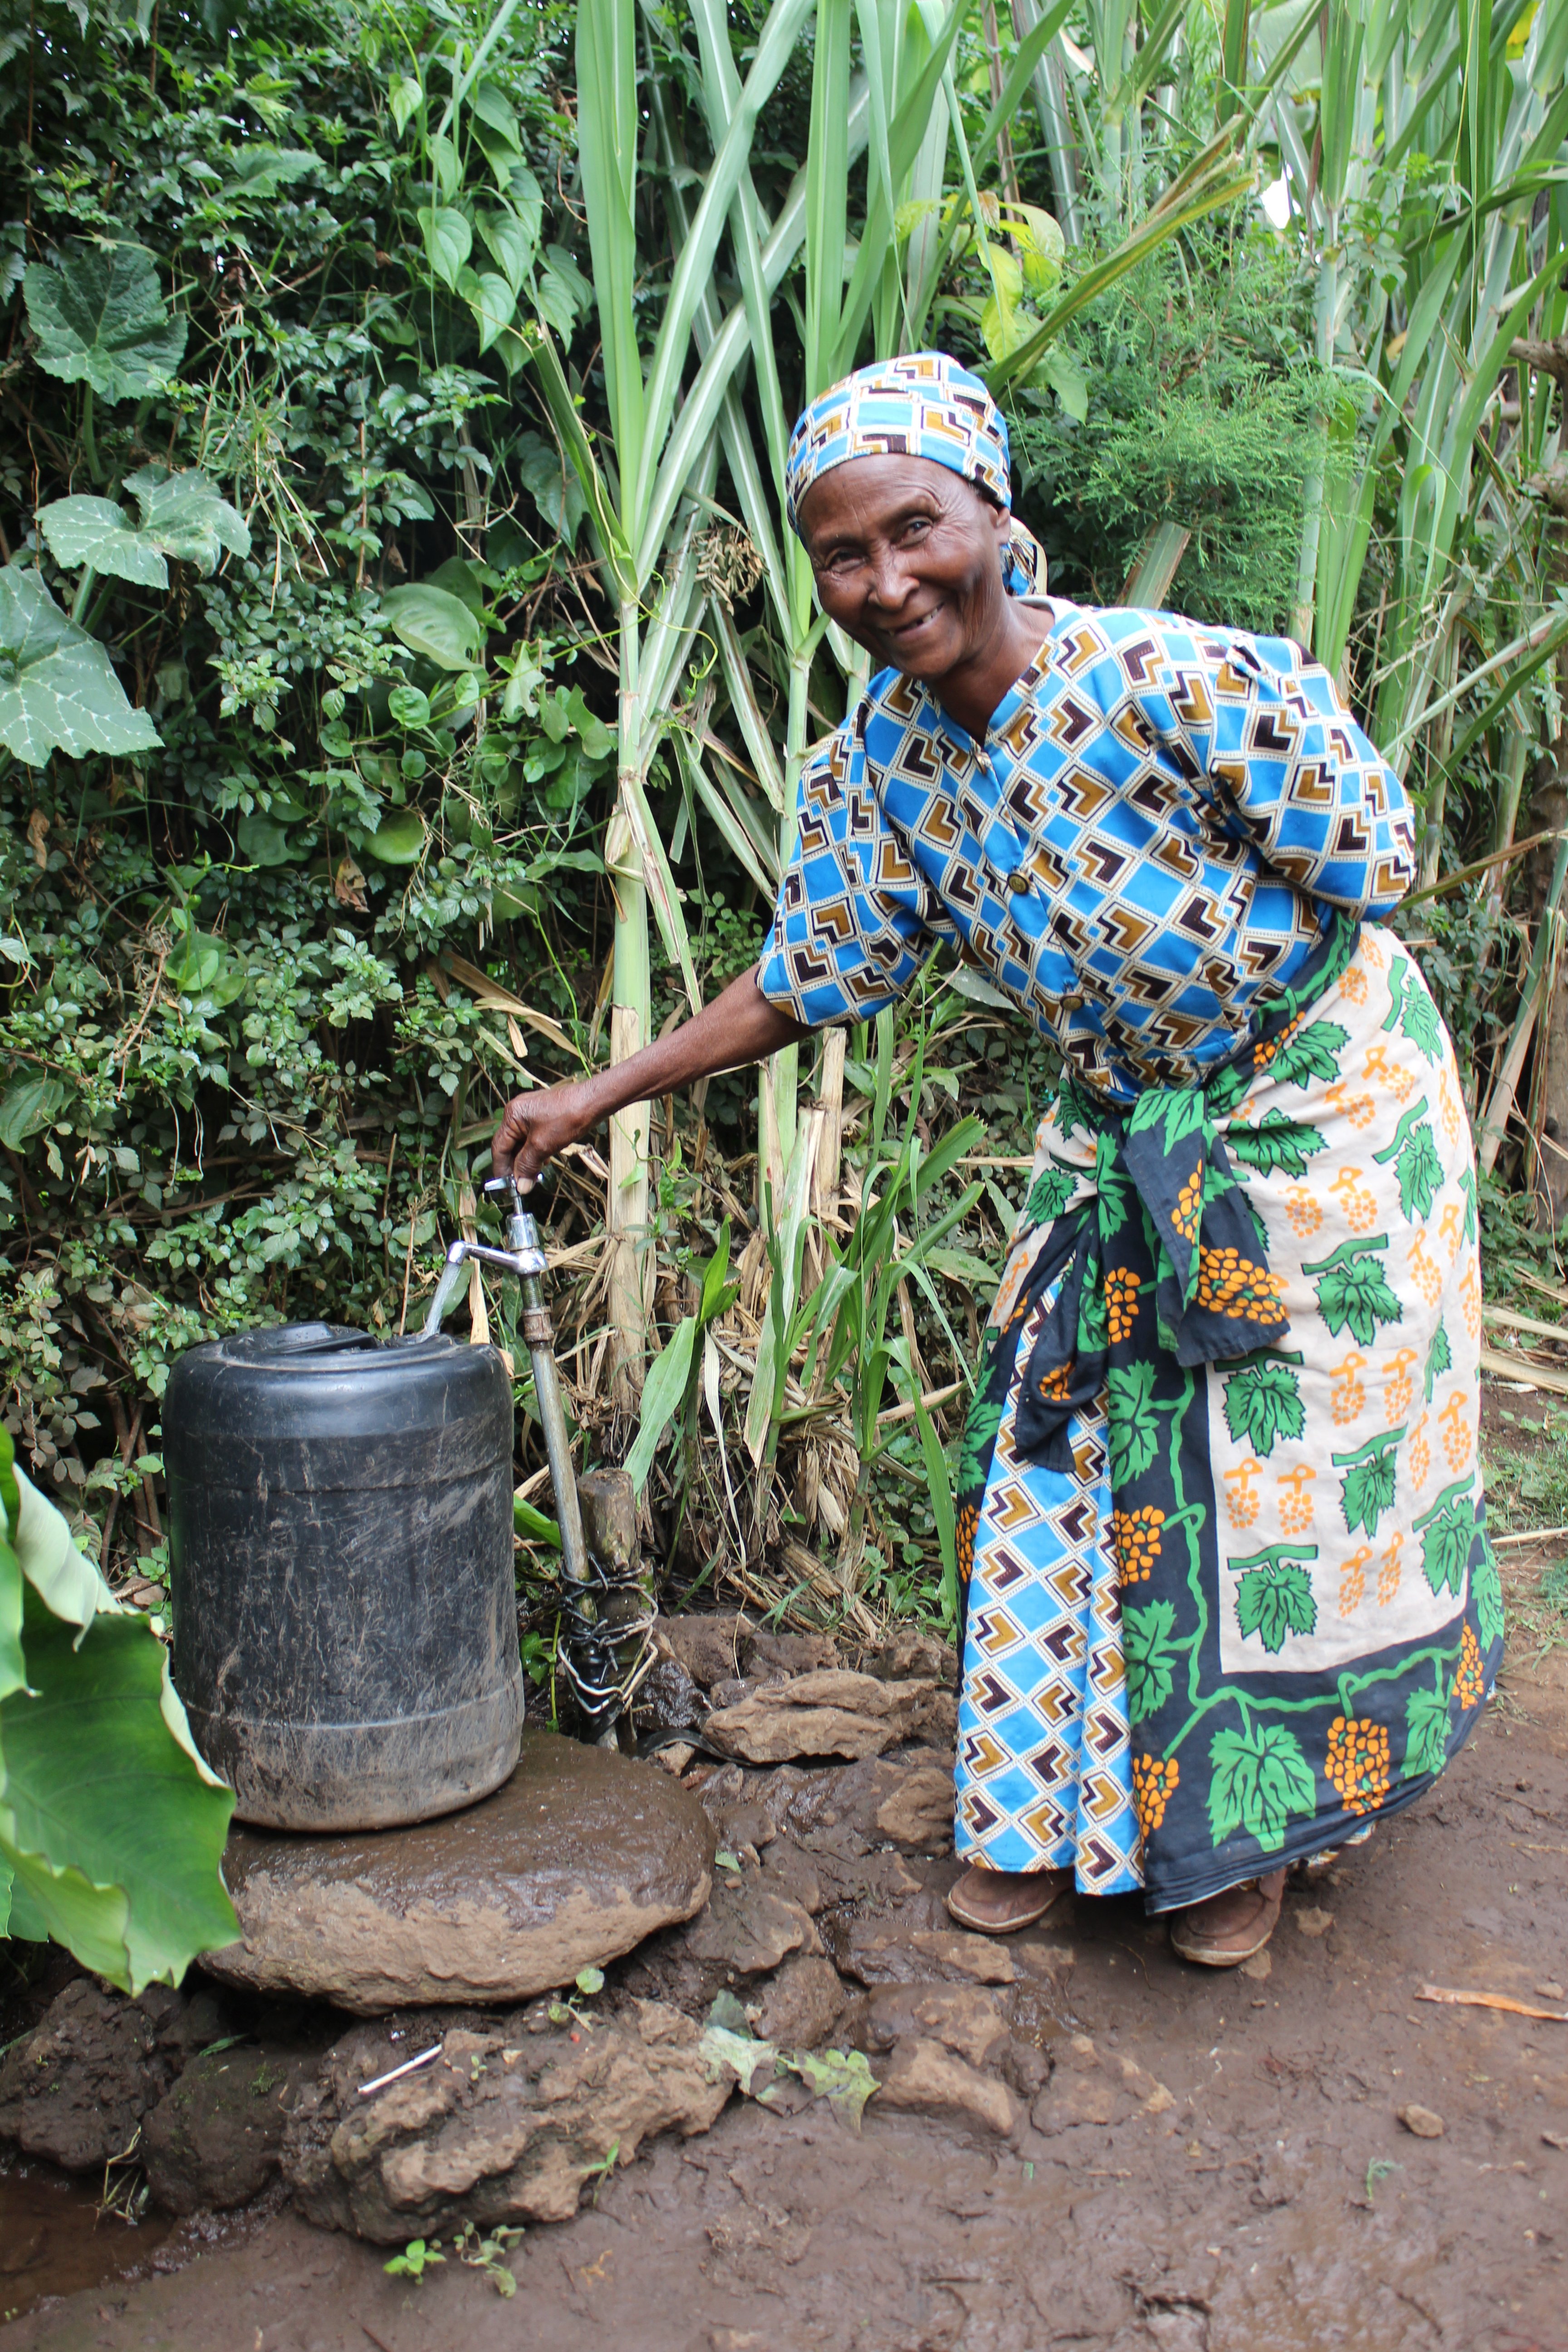 In a 2017 photo from the Unbound archives, Doris, a sponsored elder in Meru, Kenya, demonstrates the new water pump she’d recently had installed on her property. After years of lugging heavy buckets or relying on a reluctant neighbor for water, Doris was delighted to be able to share water with her community. 